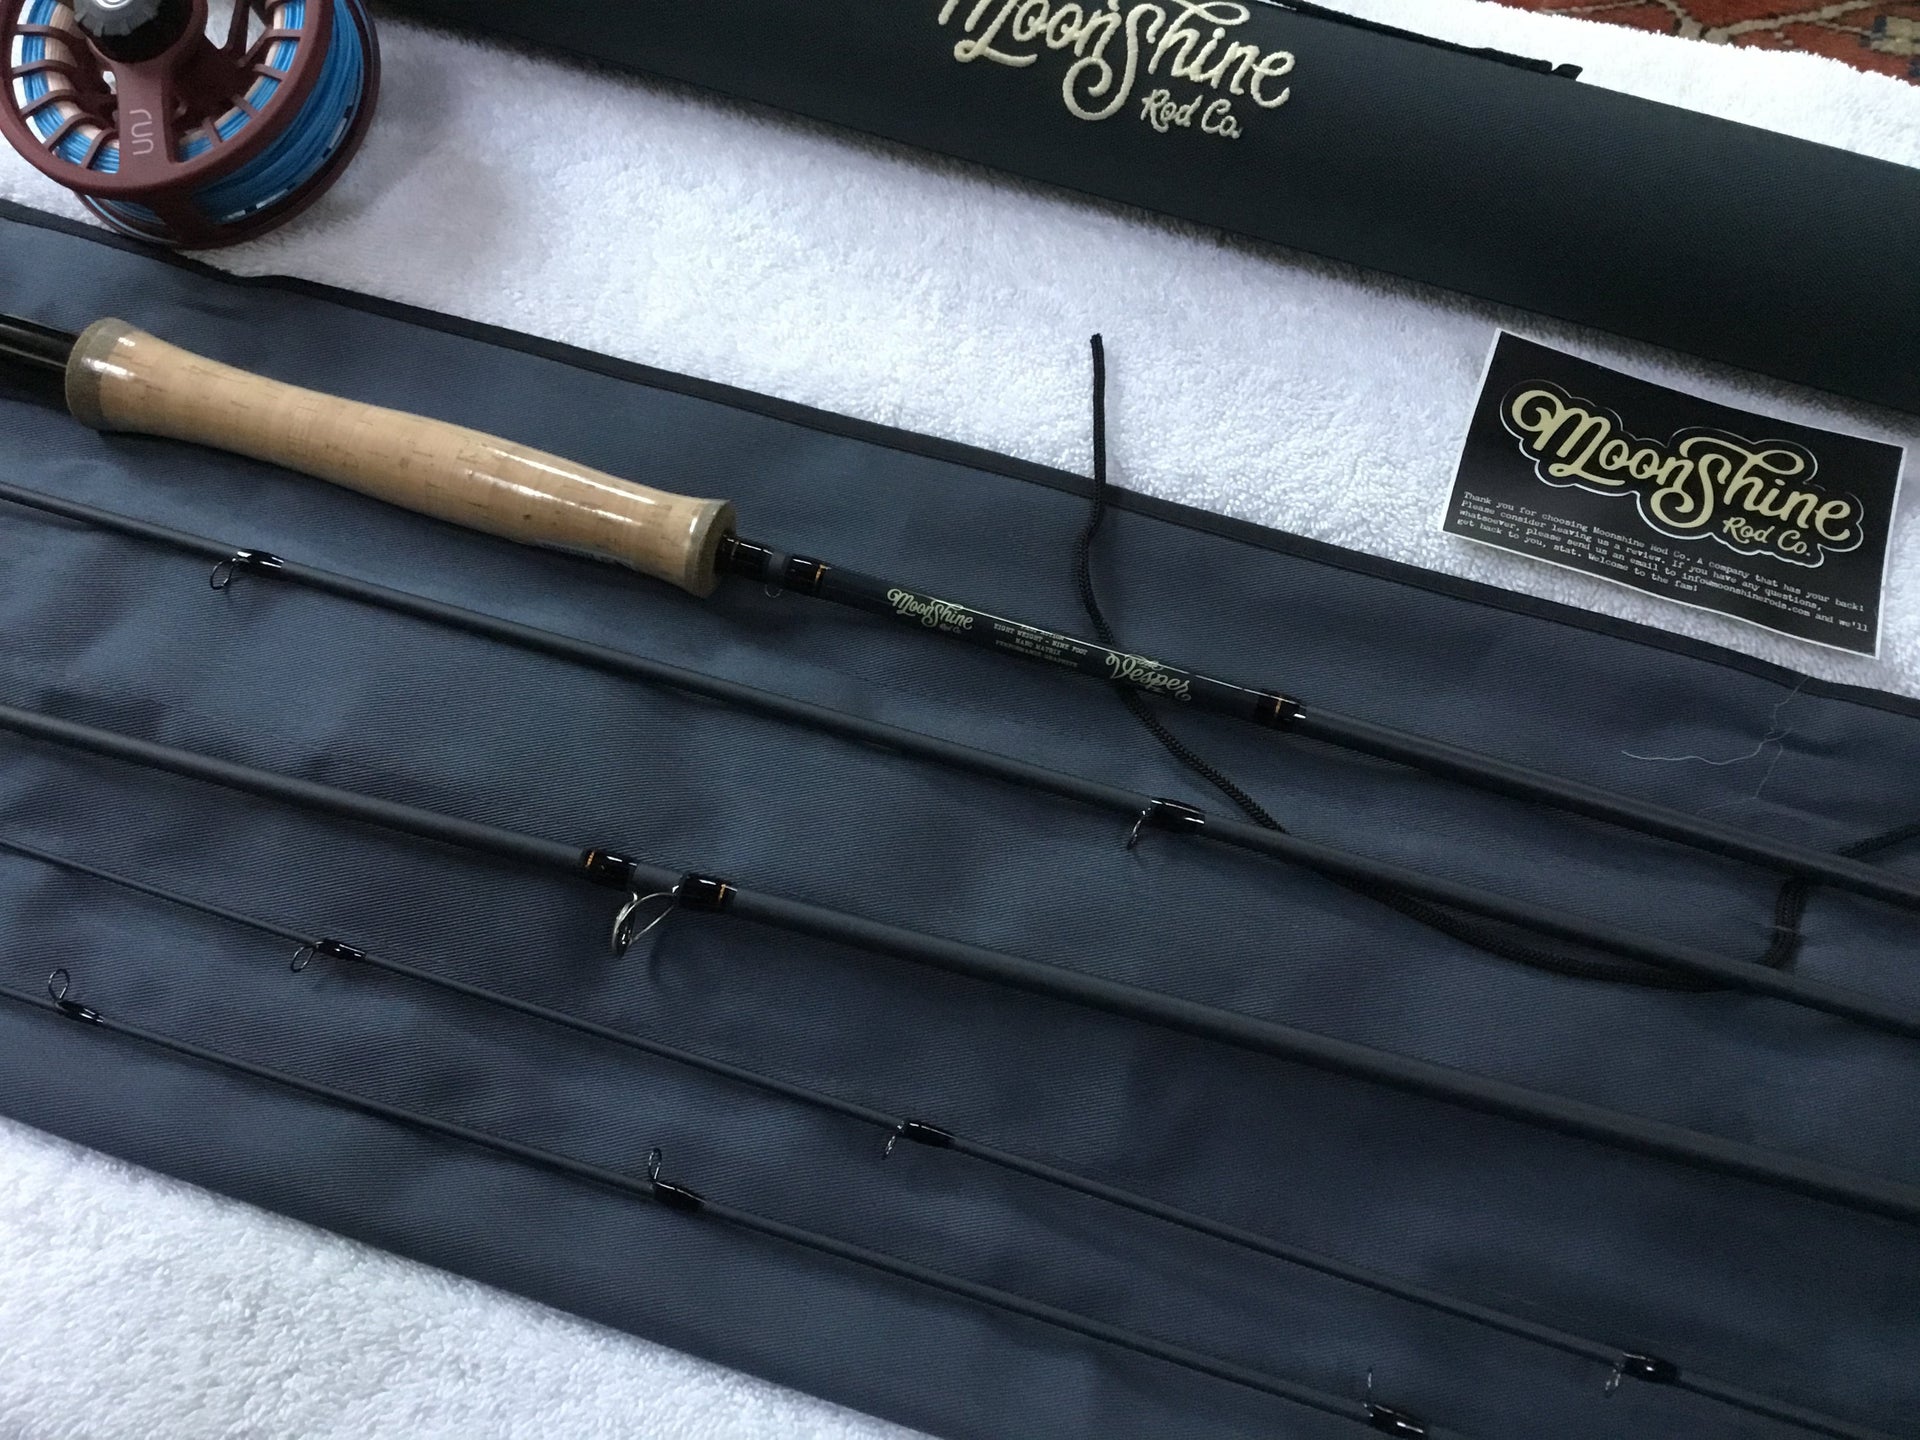 Highly rated new fly rod ~ Moonshine Vesper 8 wt ~ 40 % off two